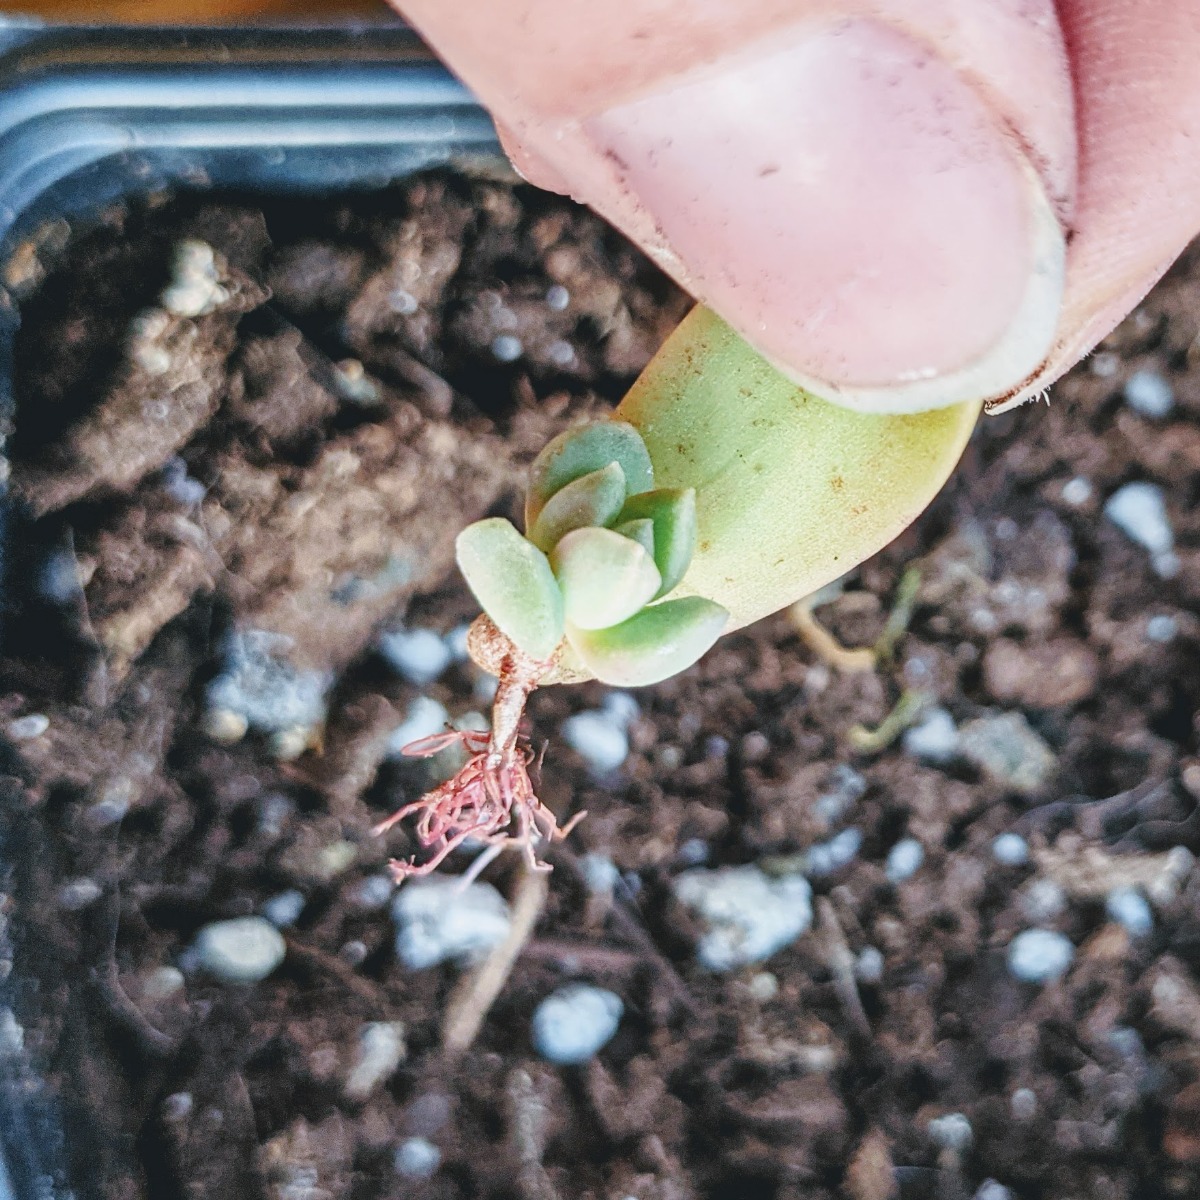 Propagating Succulent Leaves - holding a baby succulent plant over soil